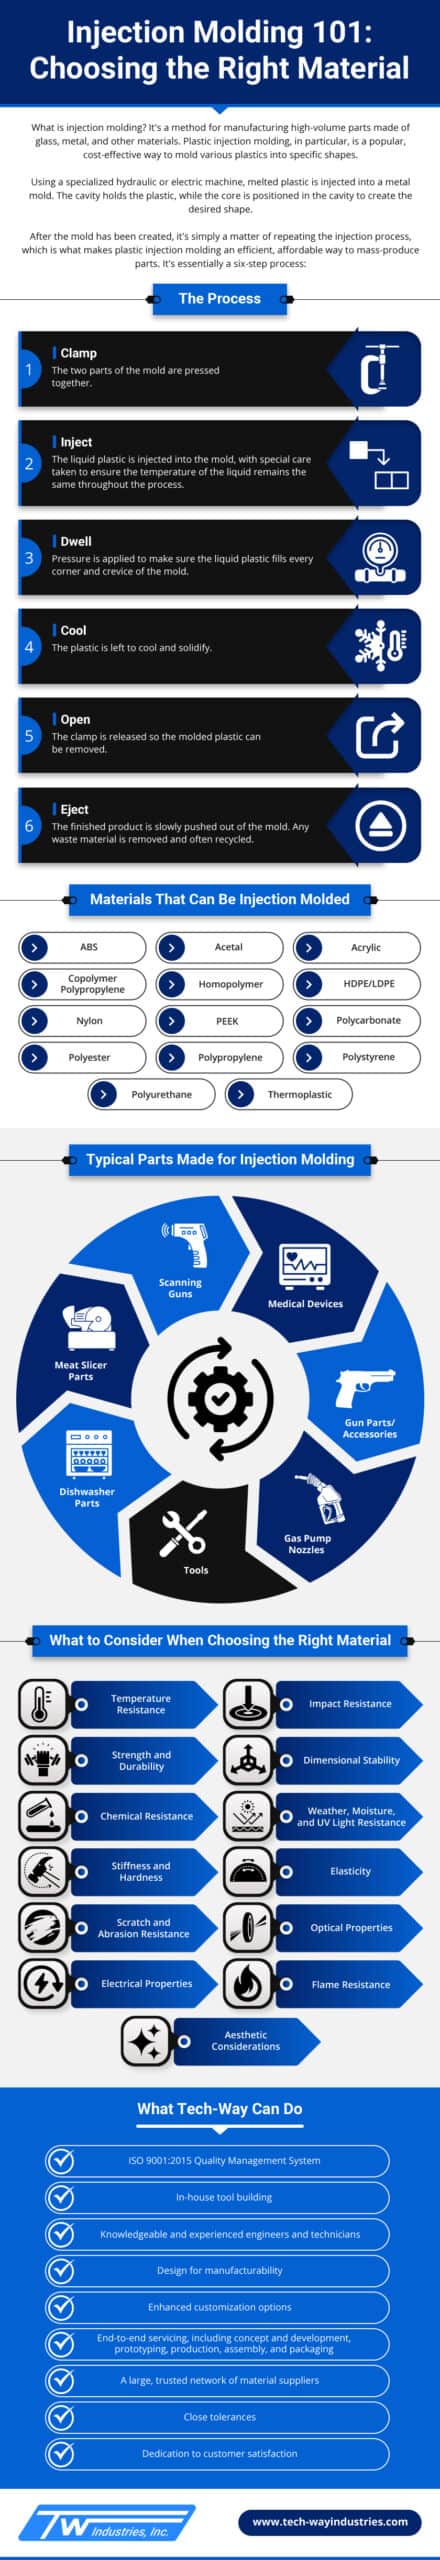 Injection Molding 101 : Choosing the Right Material